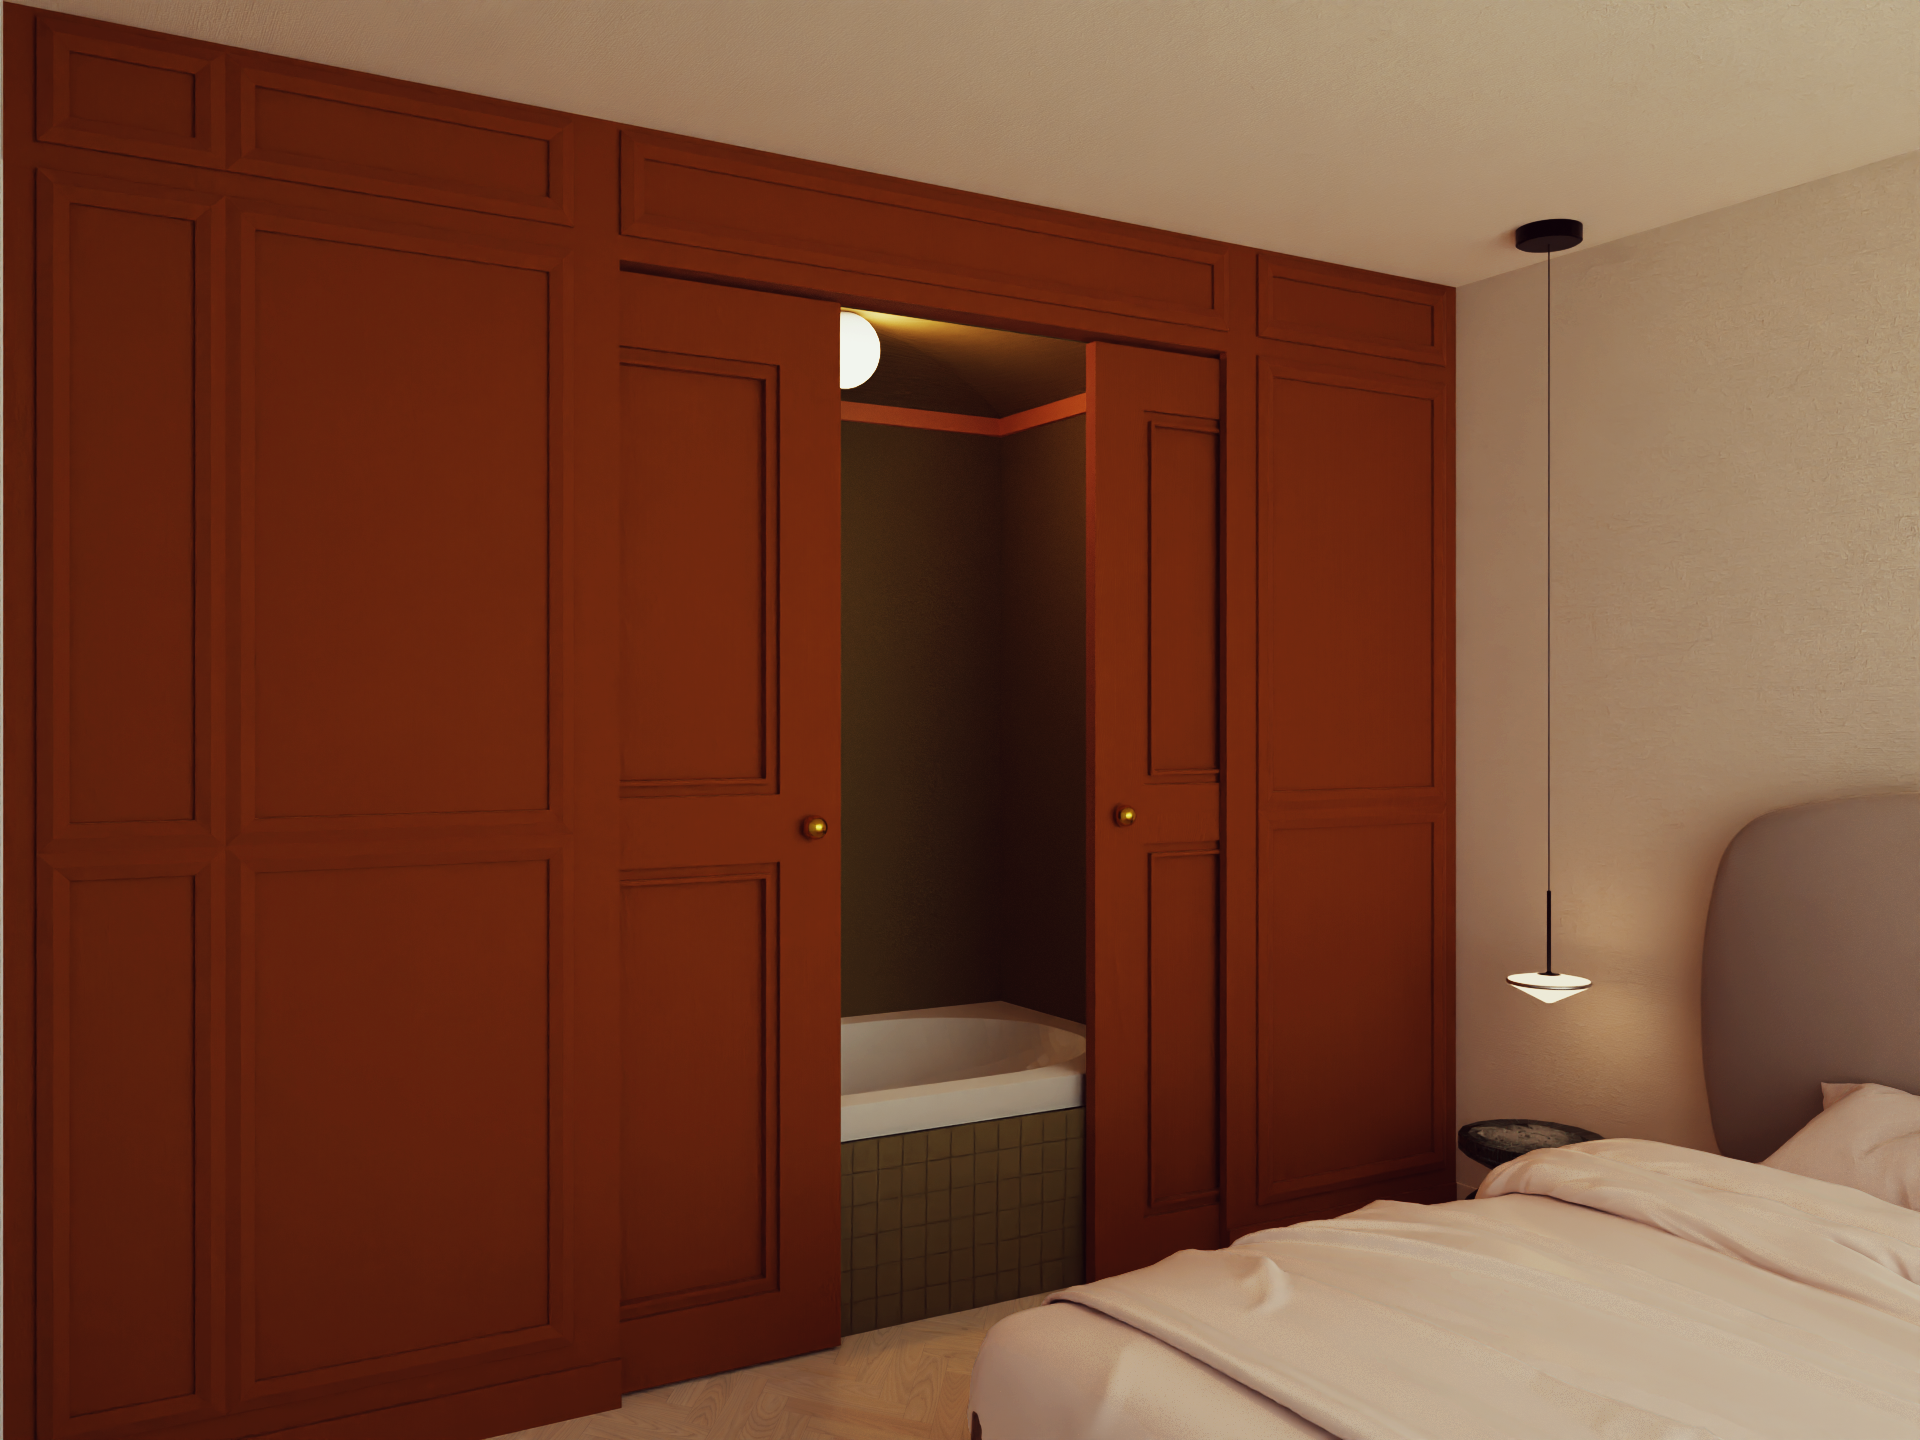 Visual of bedroom with bath in red closet